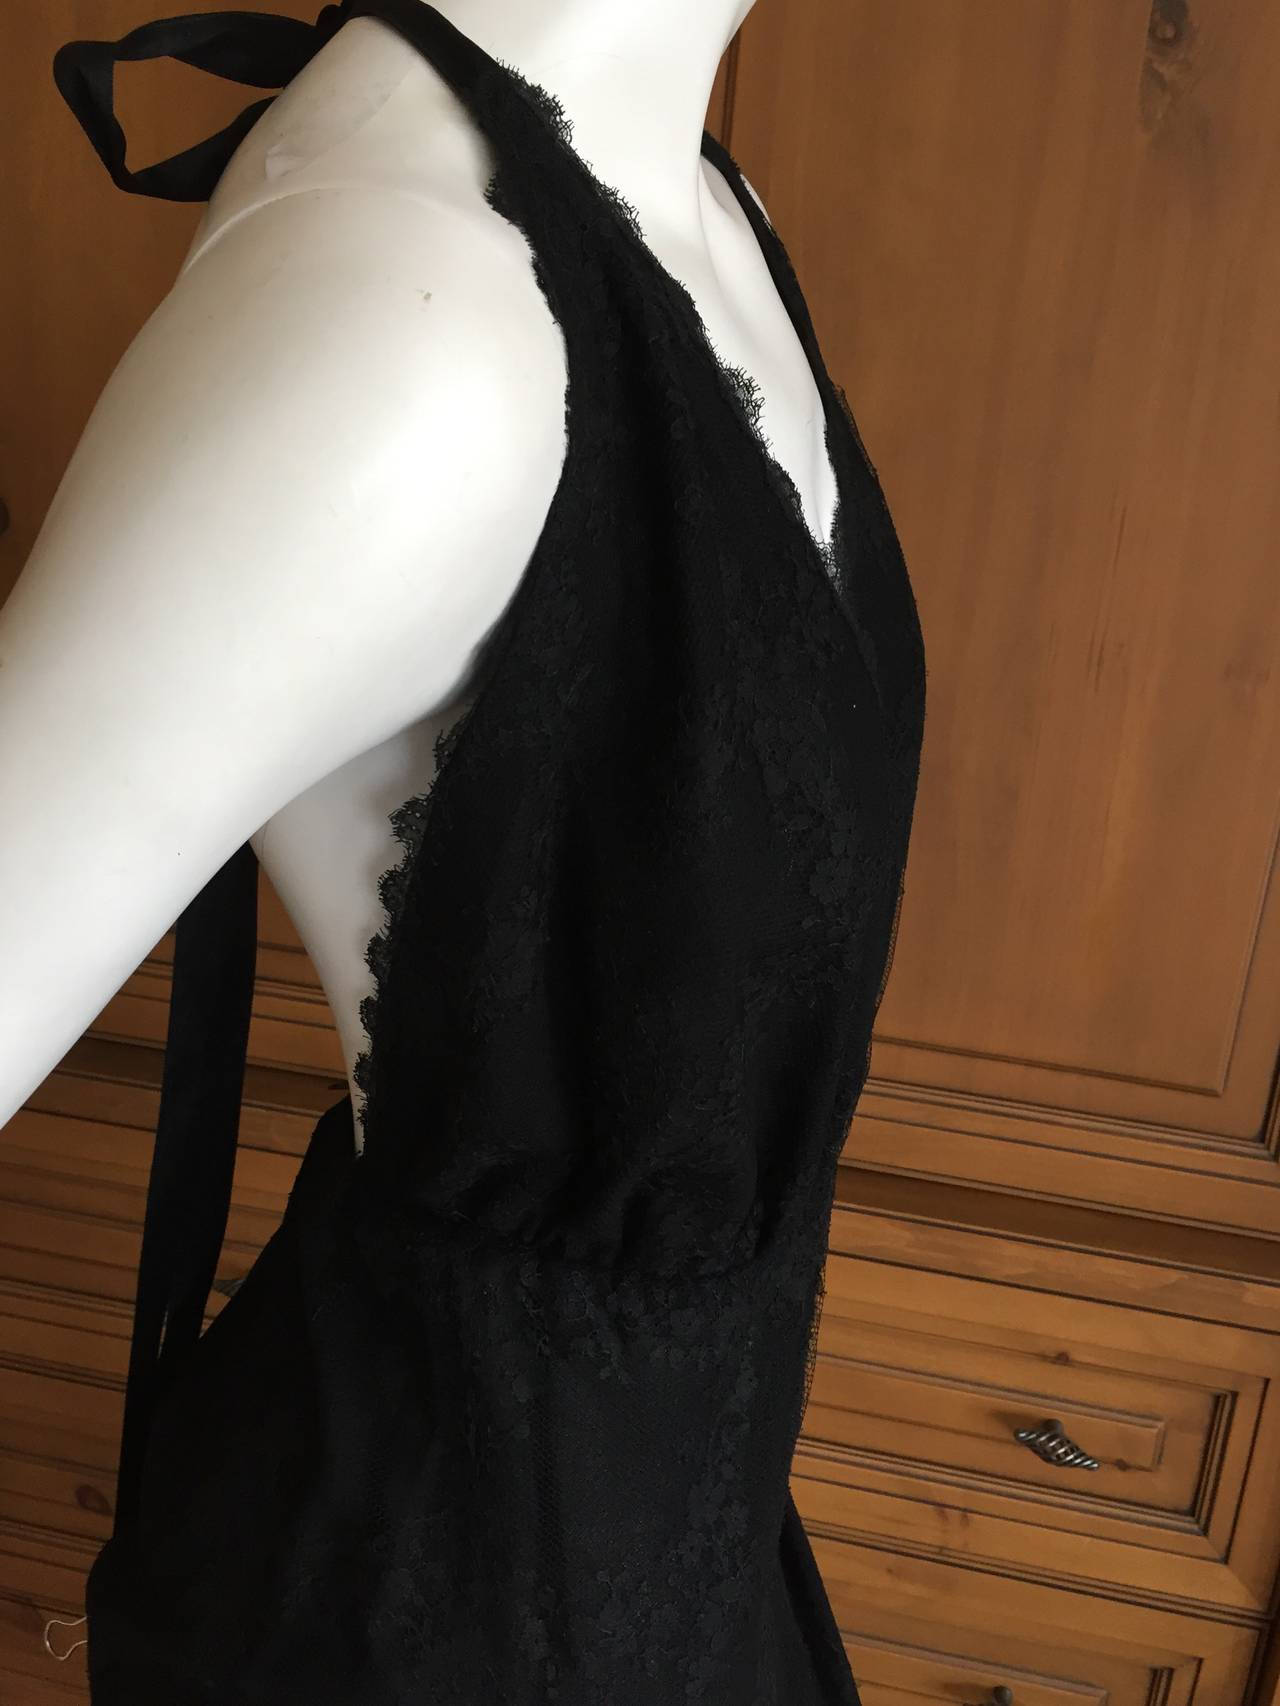 Women's Galanos Backless Halter Black Lace Cocktail Dress For Sale